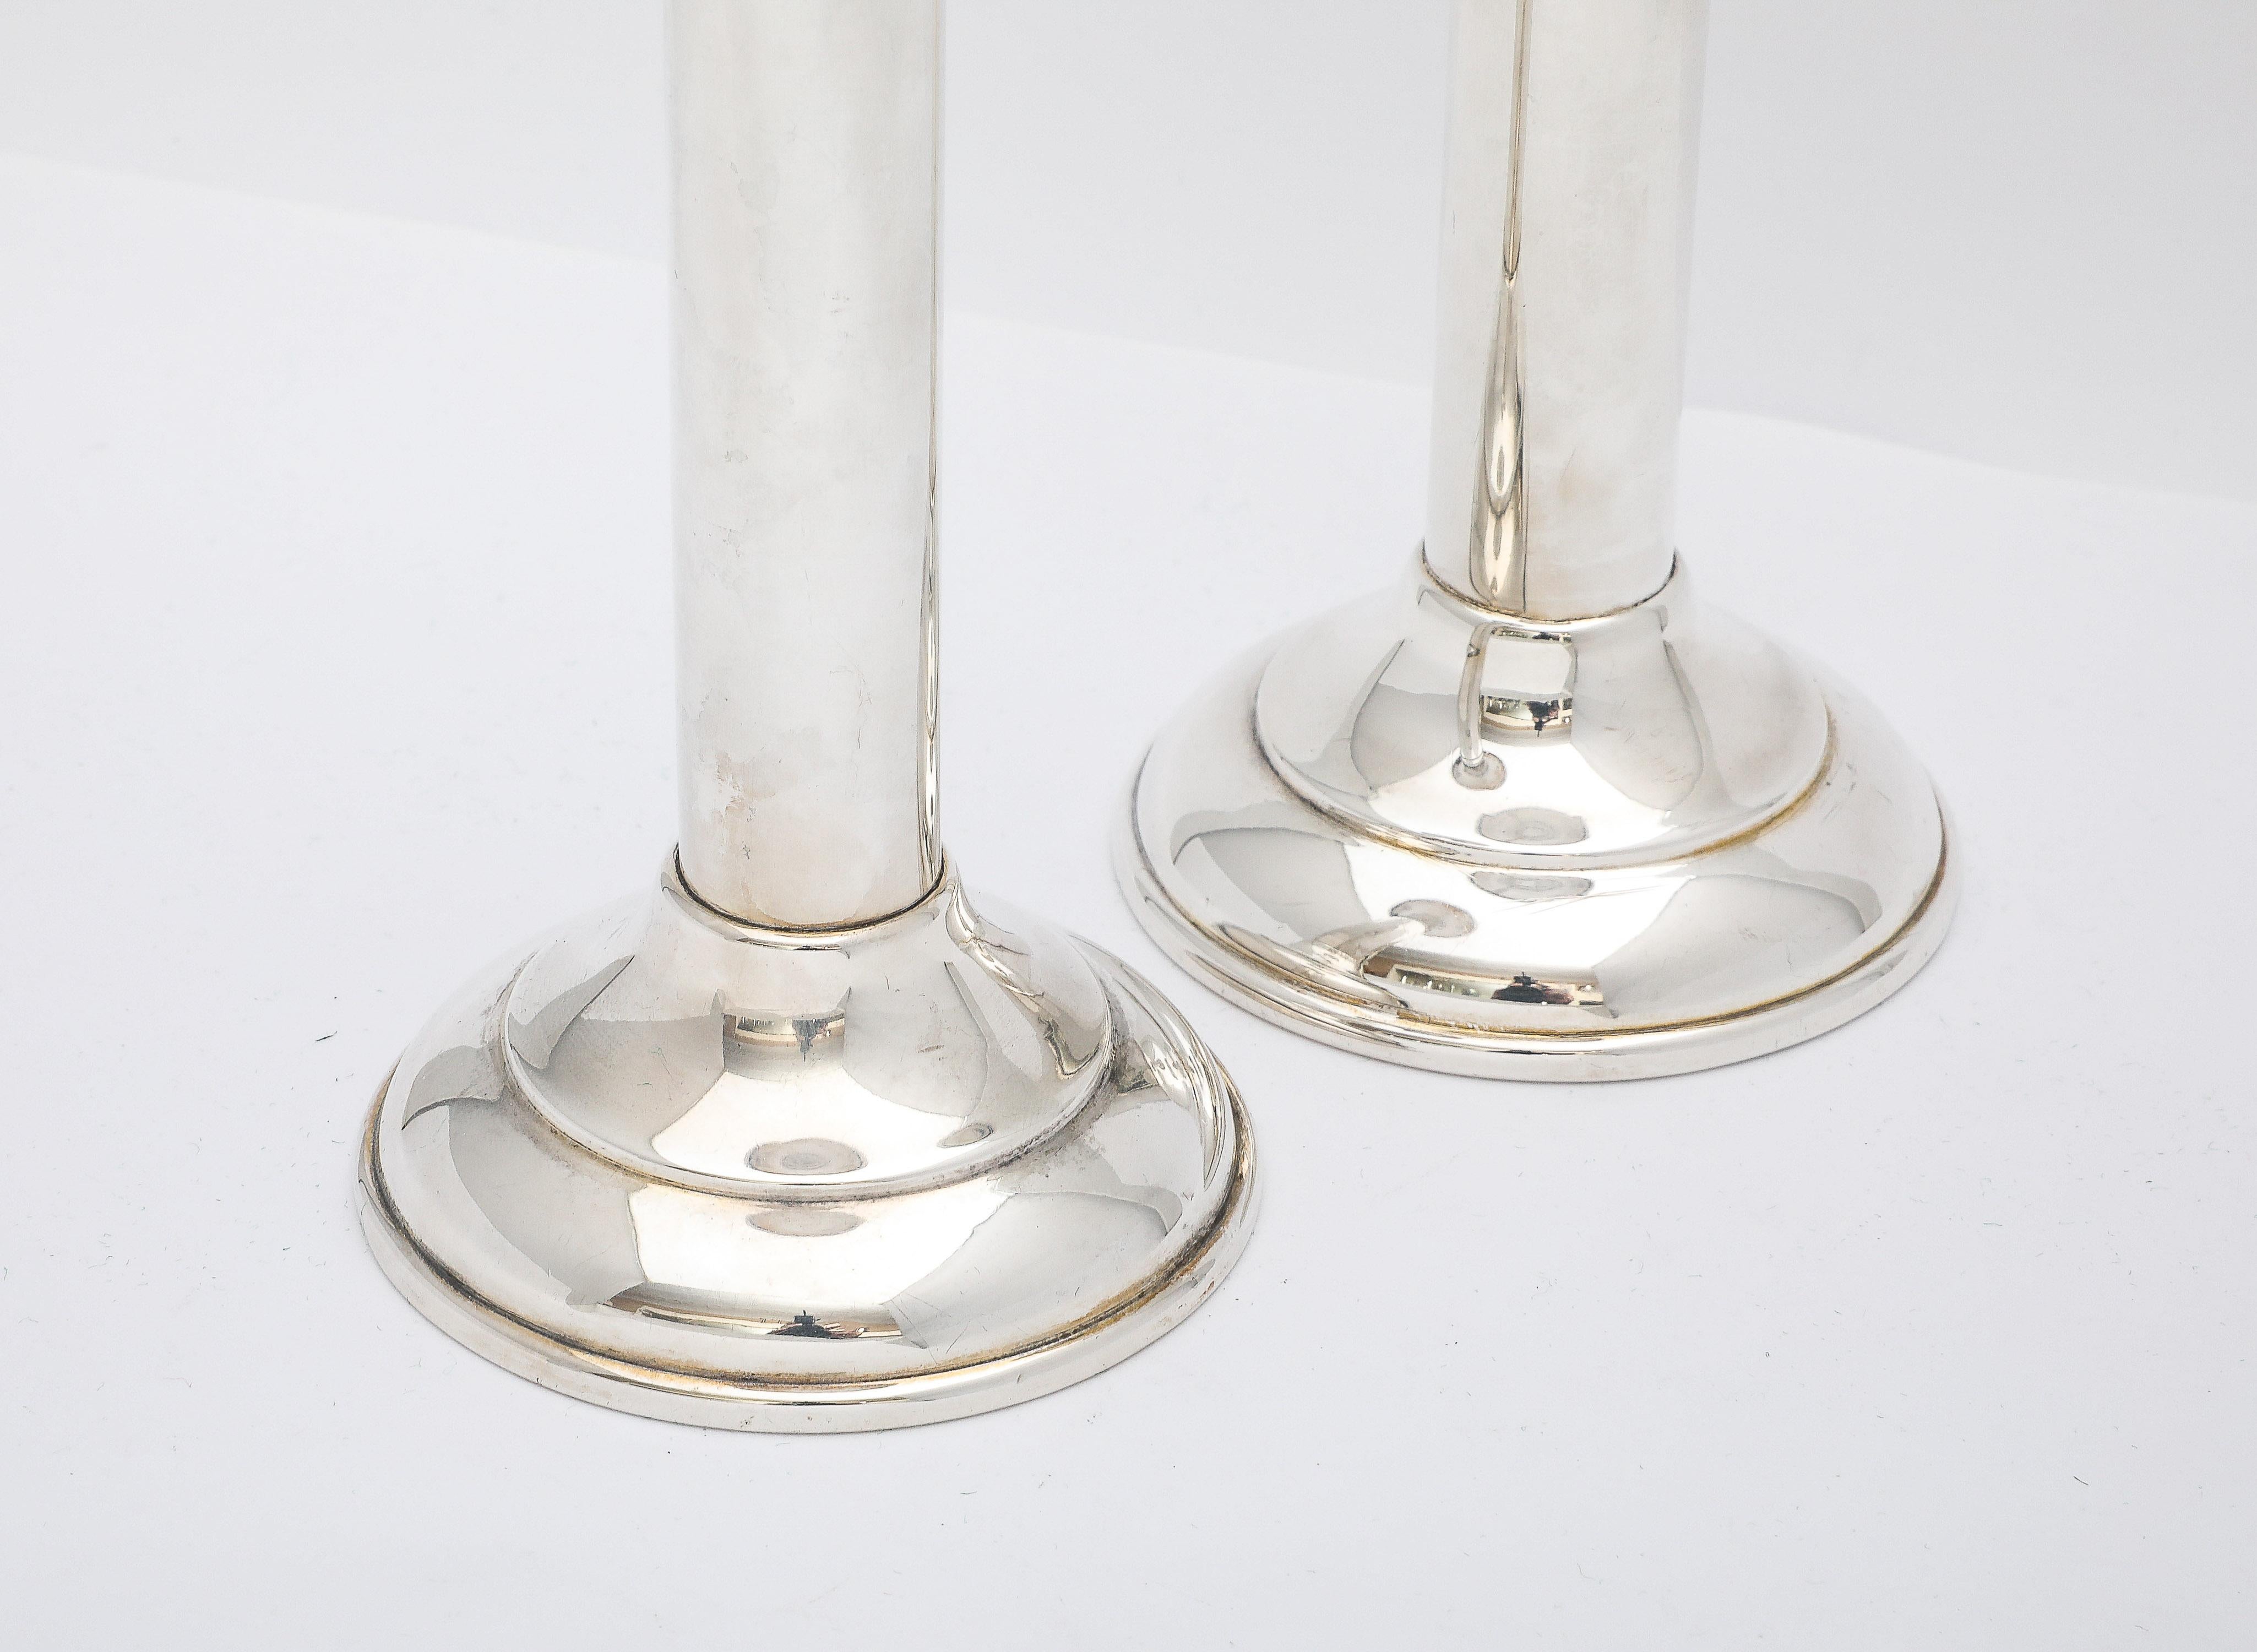 Pair of Edwardian Period Sterling Silver Candlesticks For Sale 10